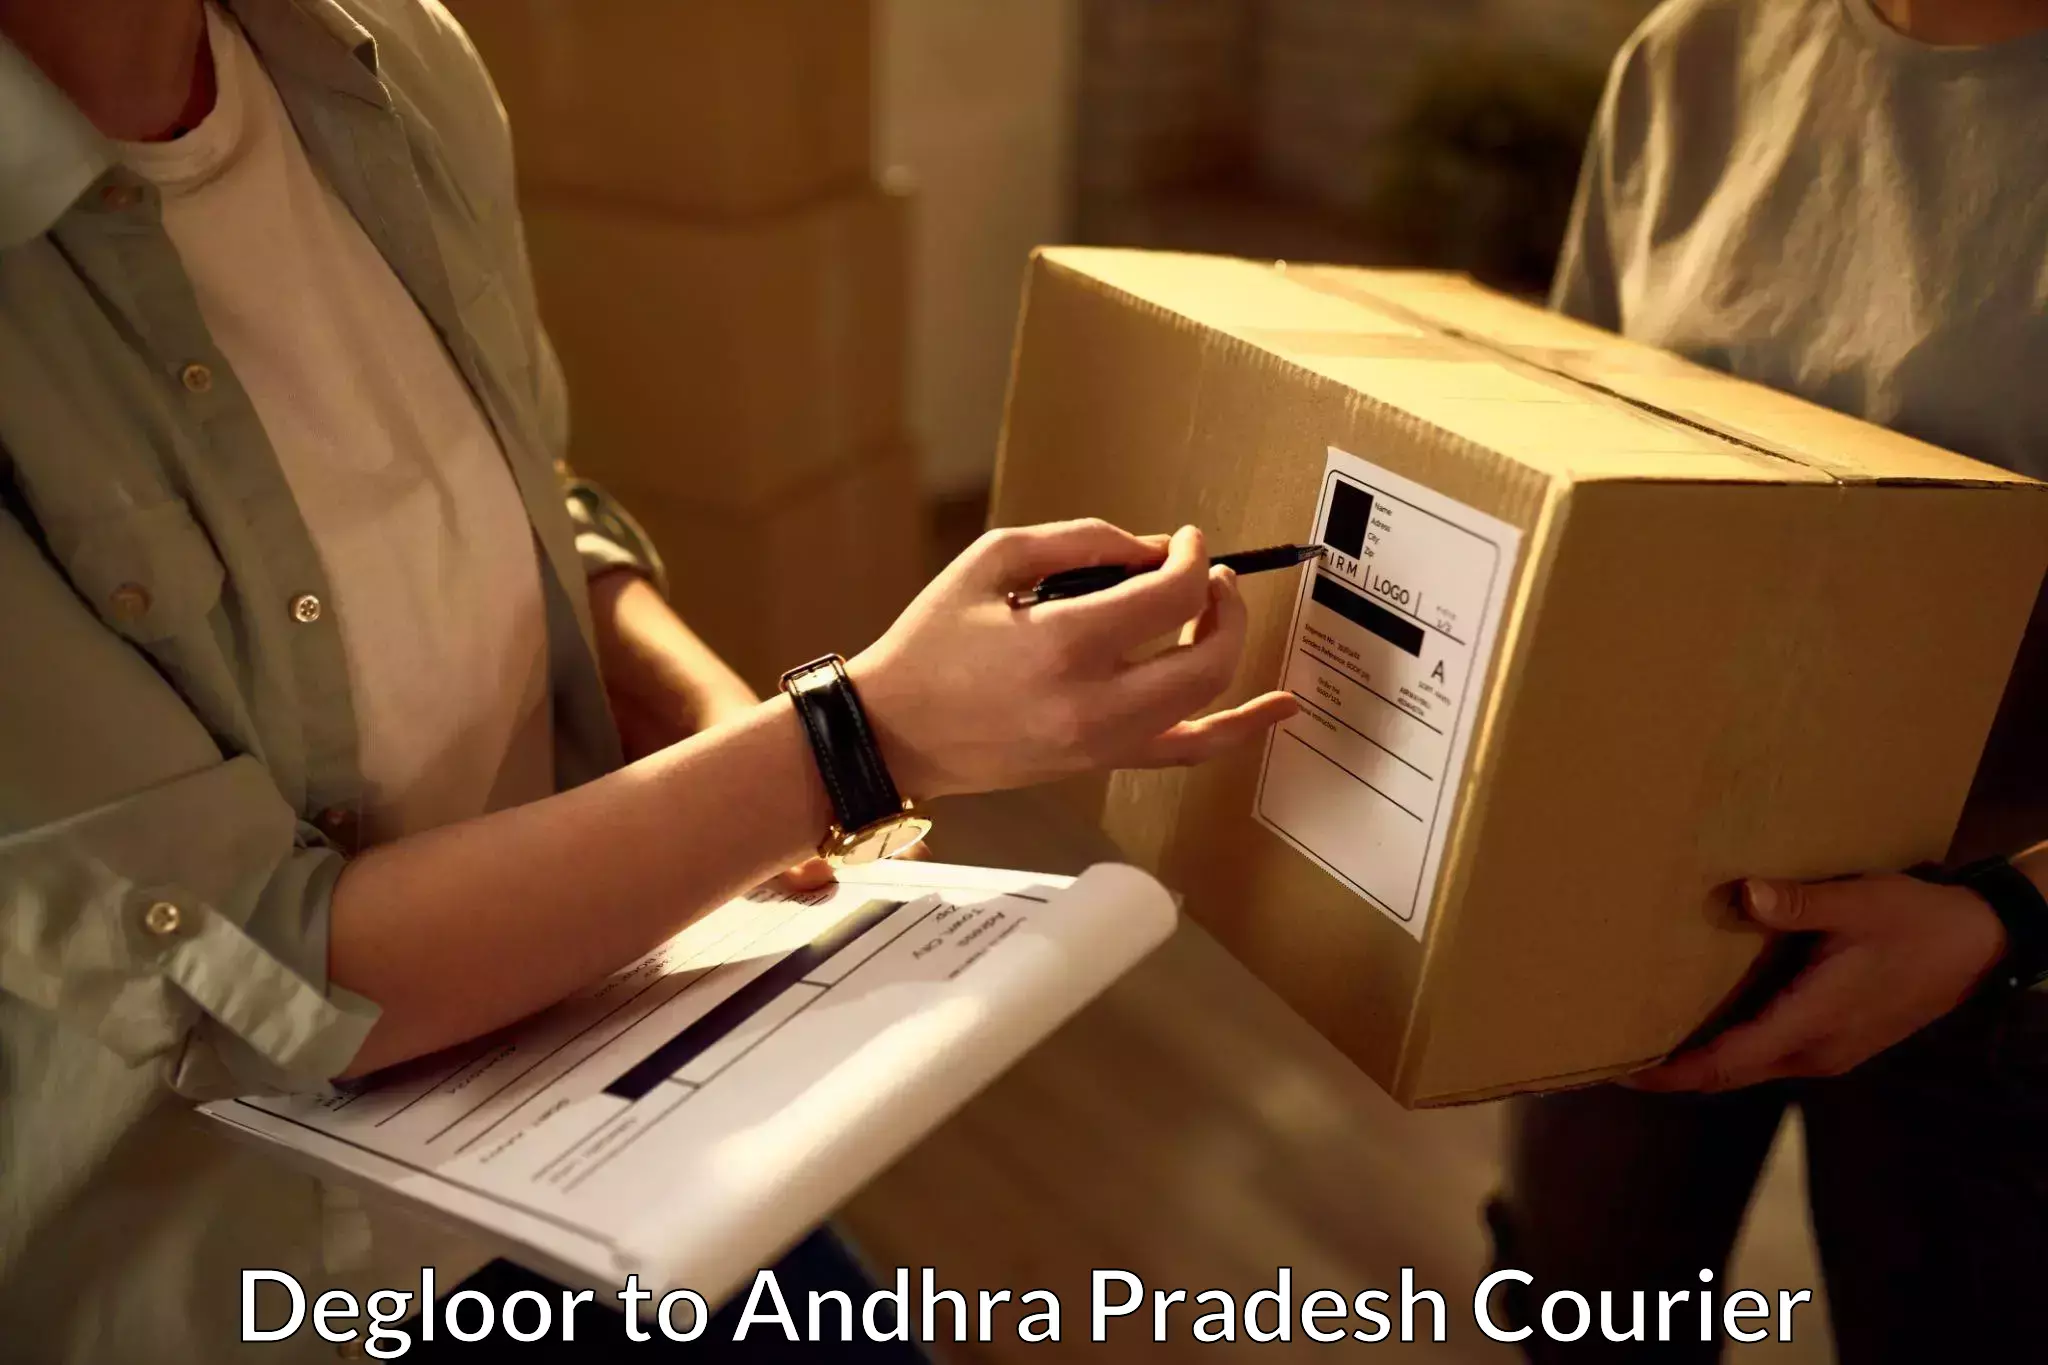 Courier service booking Degloor to Visakhapatnam Port